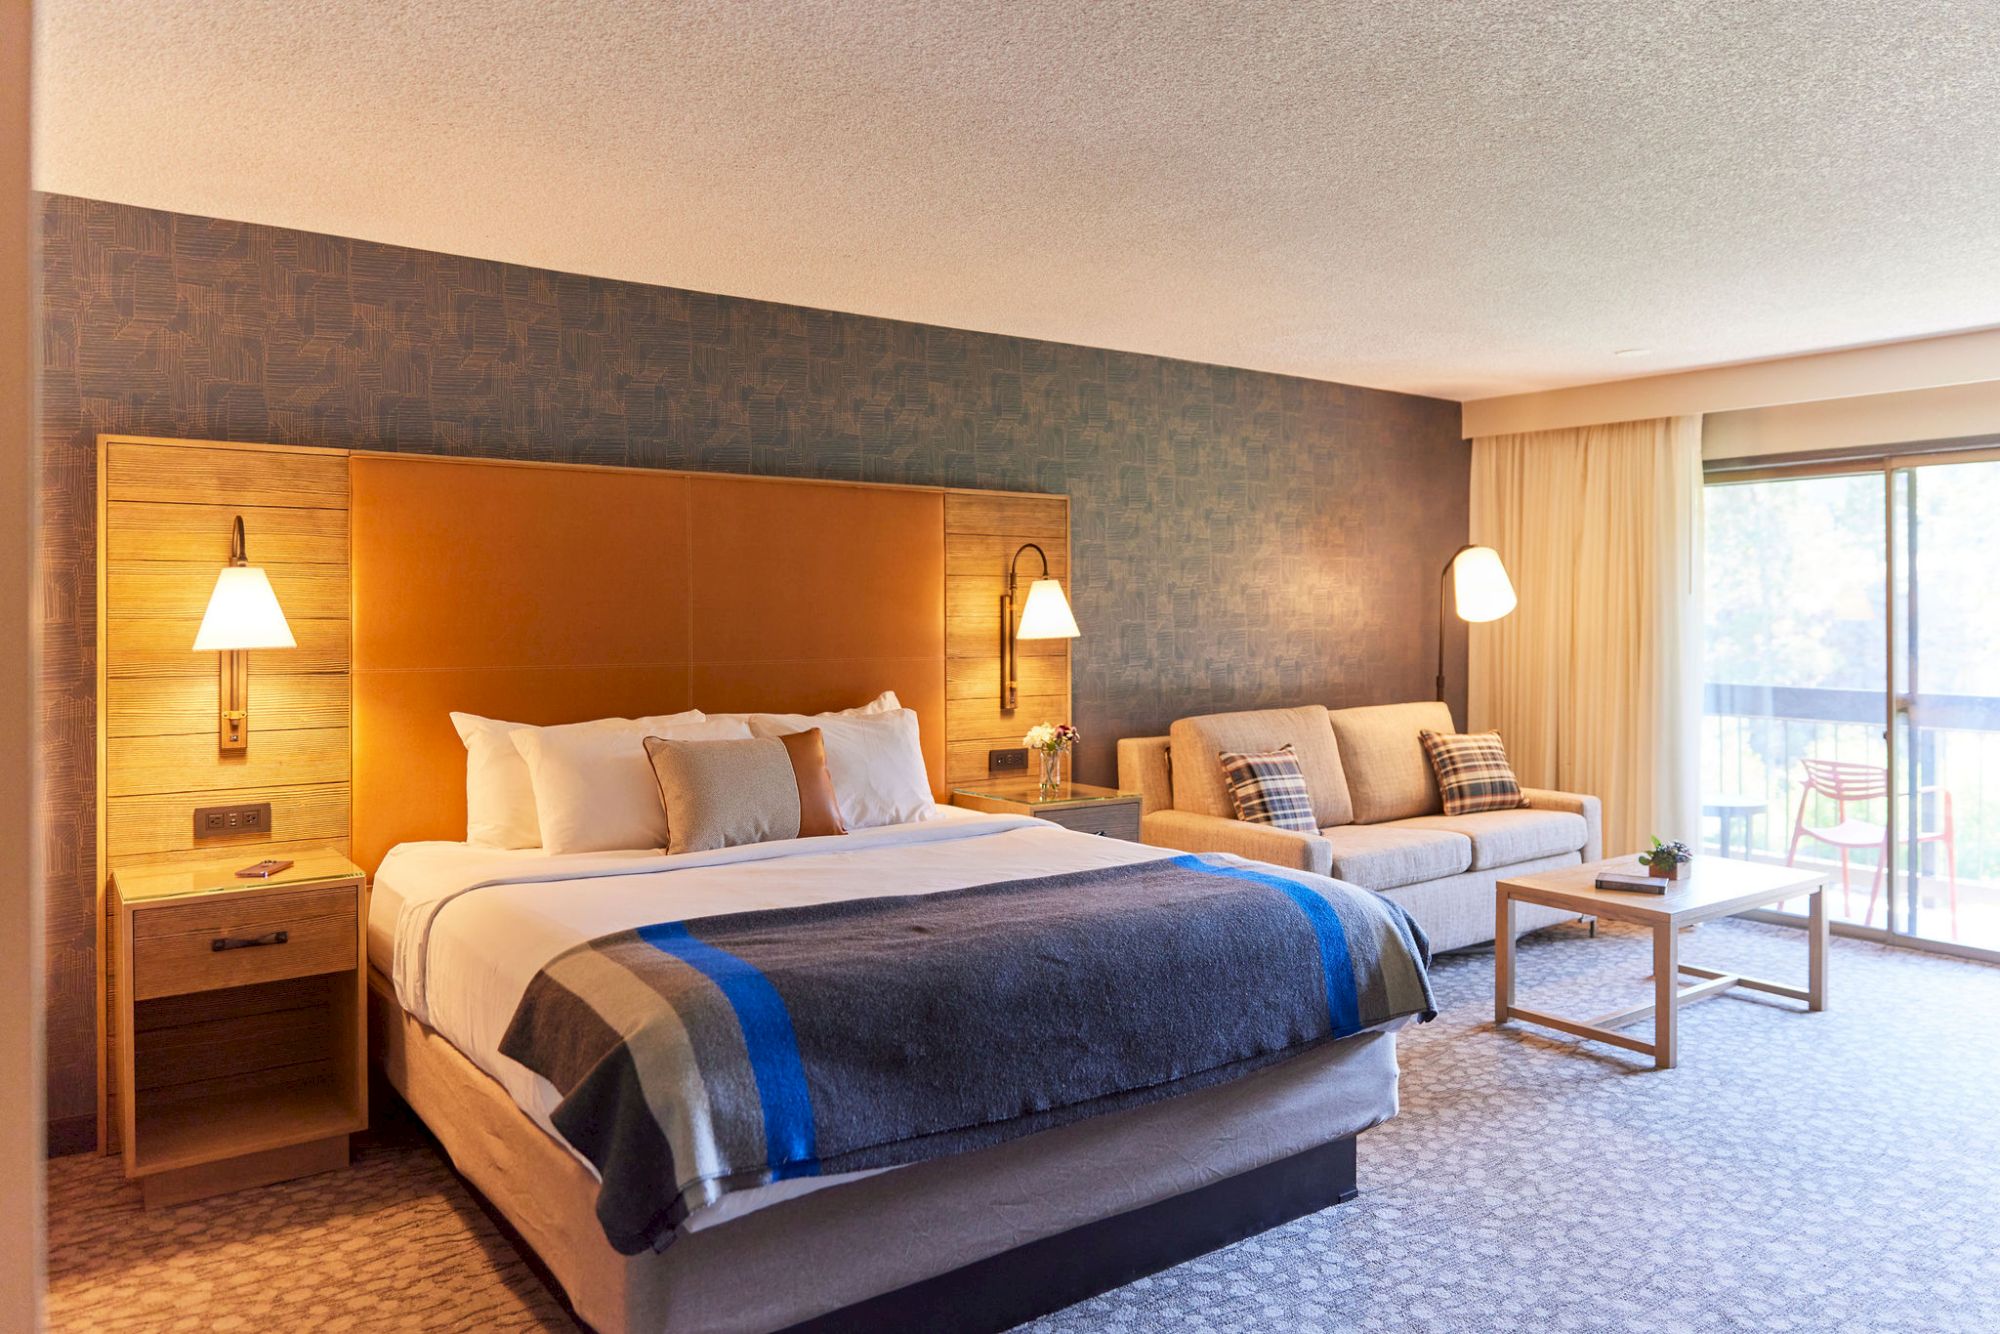 A modern hotel room with a King bed, lamps, seating area, and balcony access with views of Deschutes River in Bend, Oregon at Riverhouse